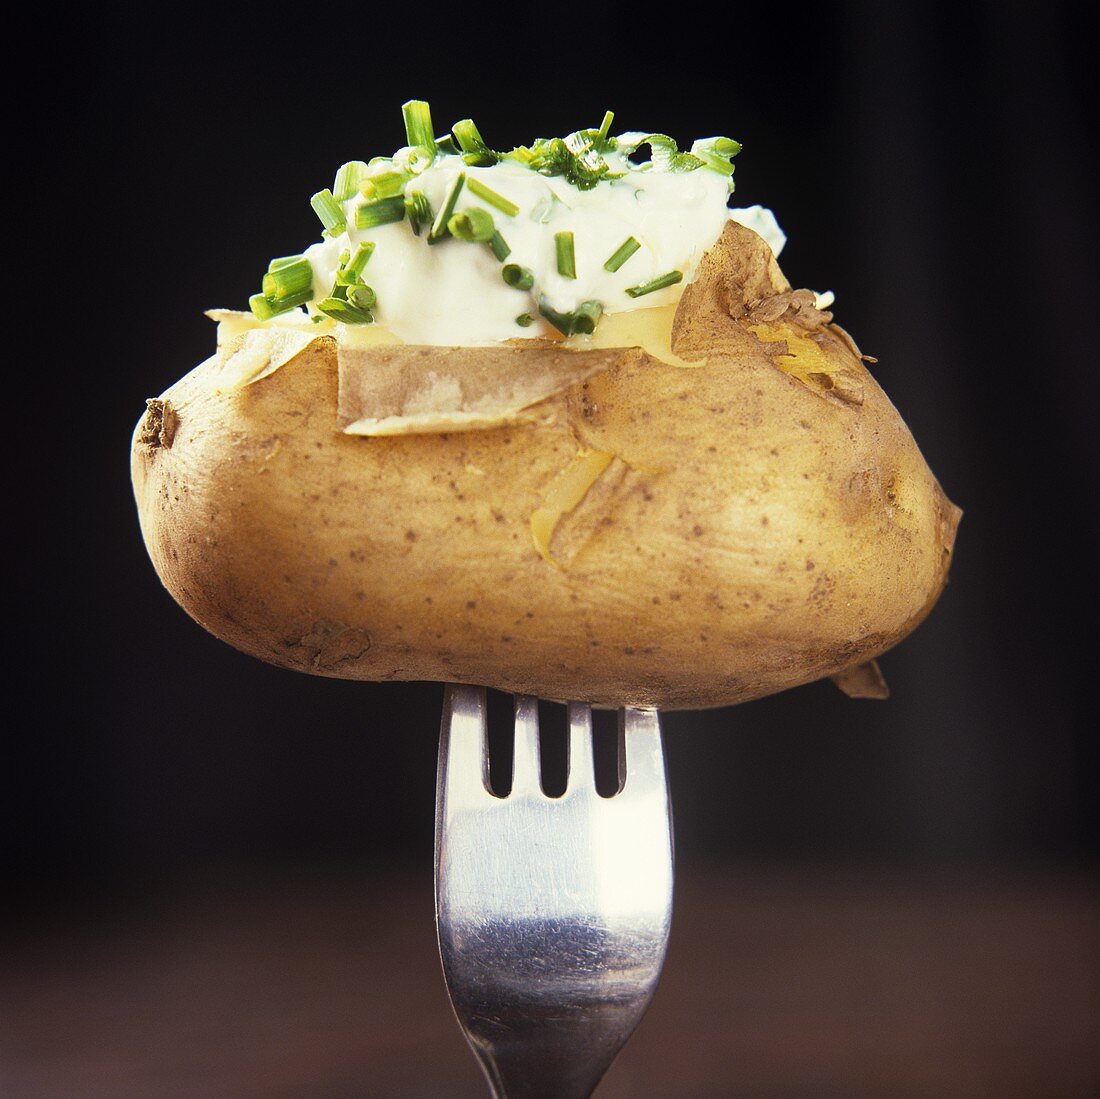 Jacket potato with crème fraiche and chives on fork